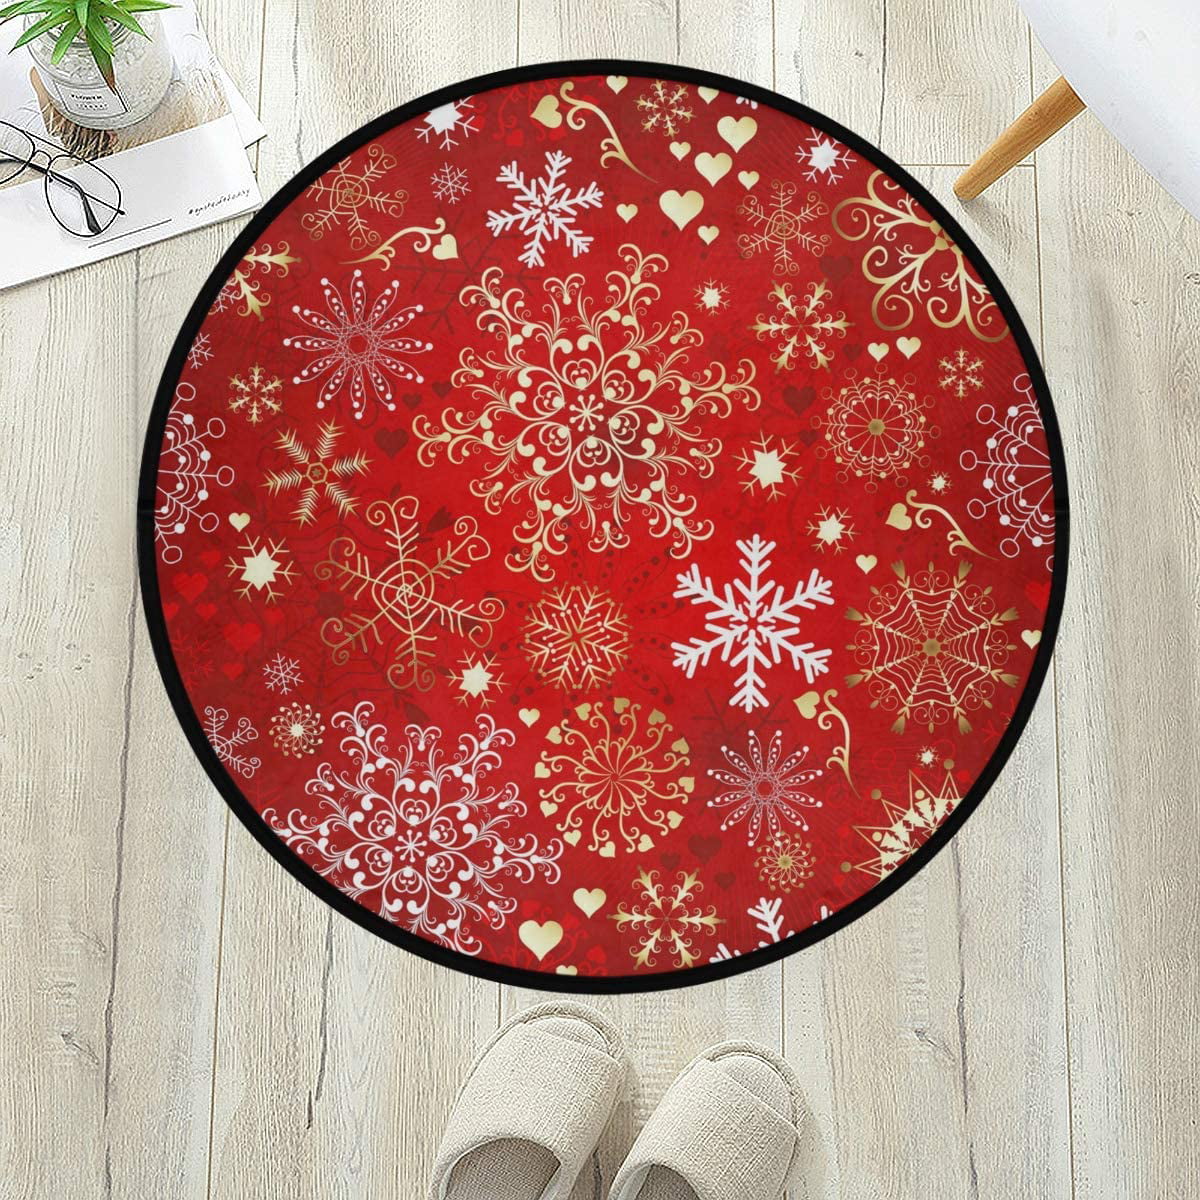 Round Rug Art Flower Daisy Non-Slip Circular Area Rugs Computer Chair Mat Comfortable Living Room Bedroom Area Rug,Washable Durable Play Mat 36.2 in 